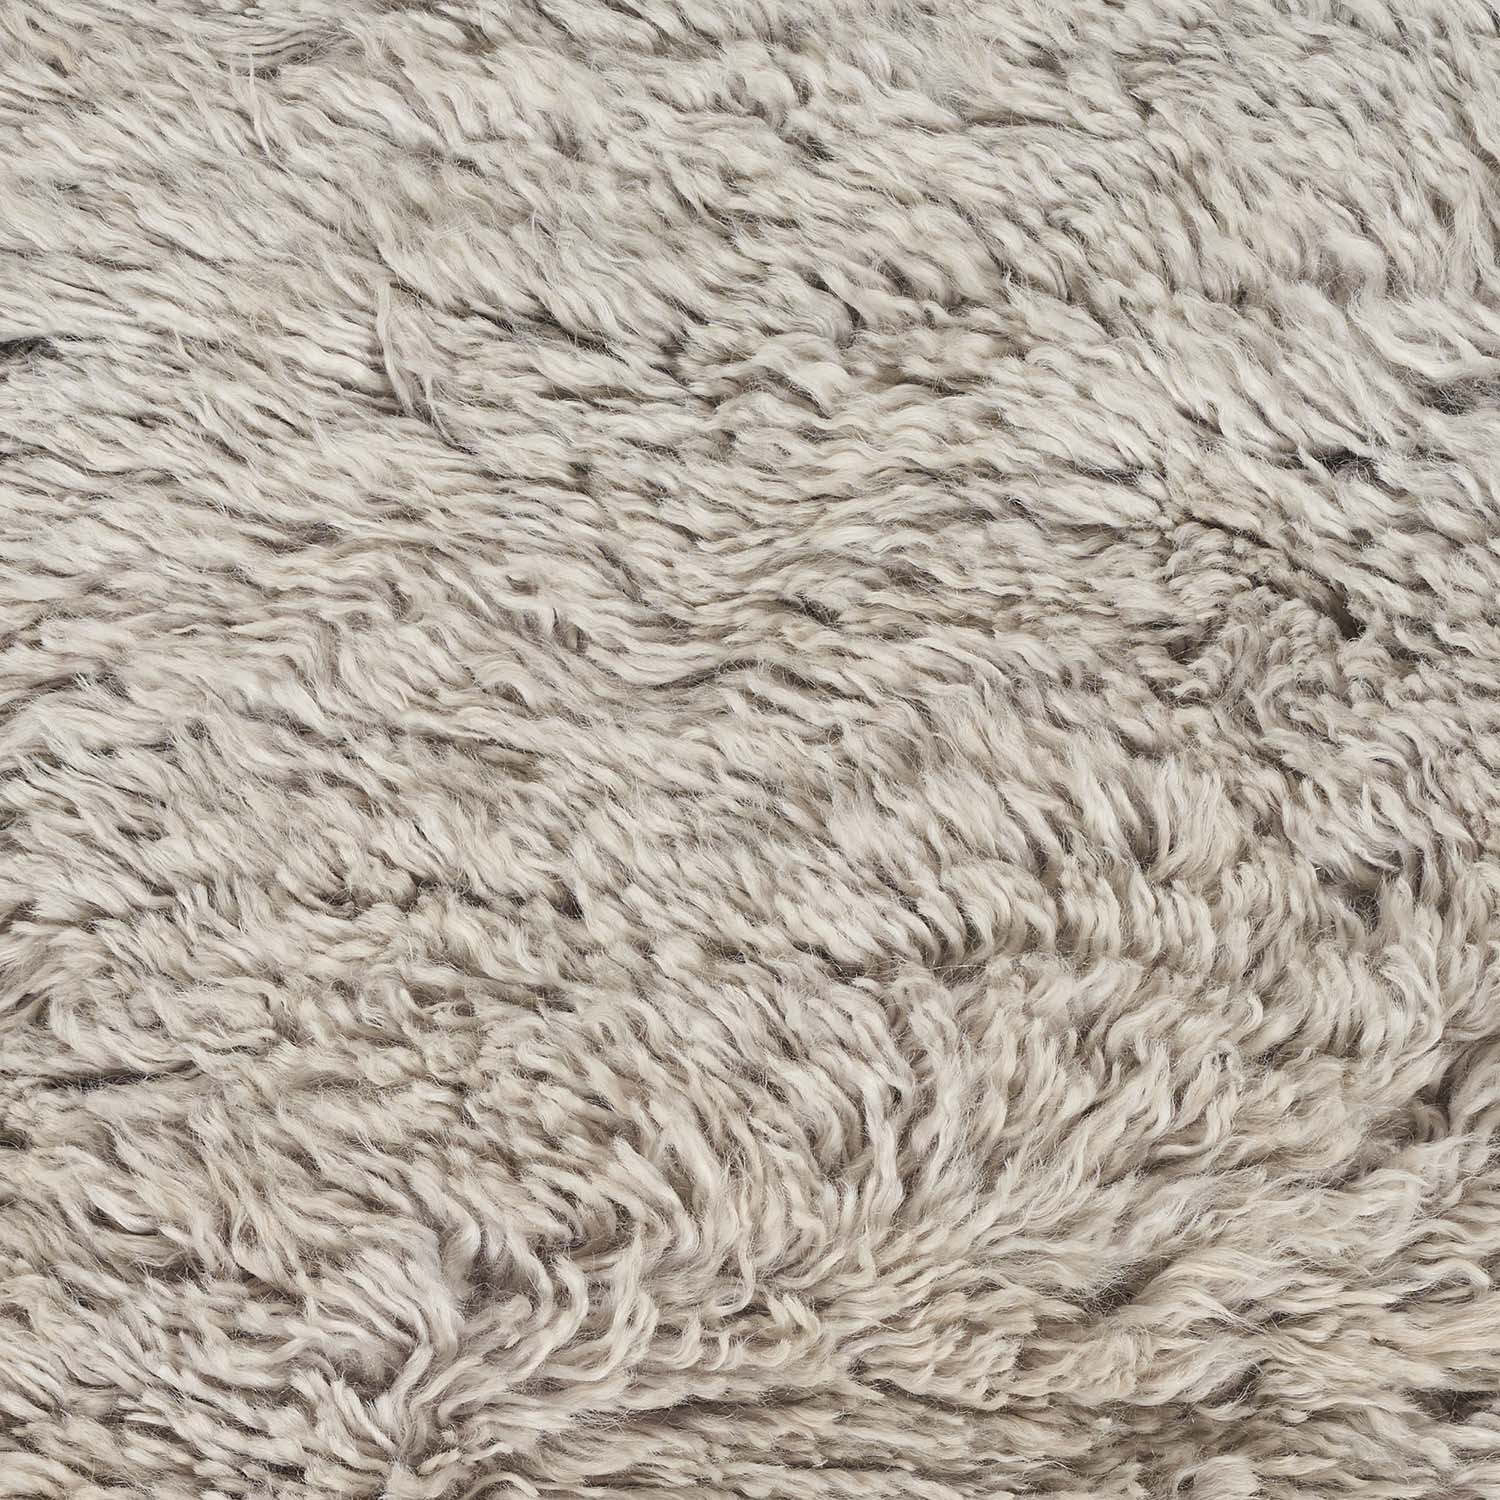 Close-up of shaggy, beige fabric with plush, wavy texture.